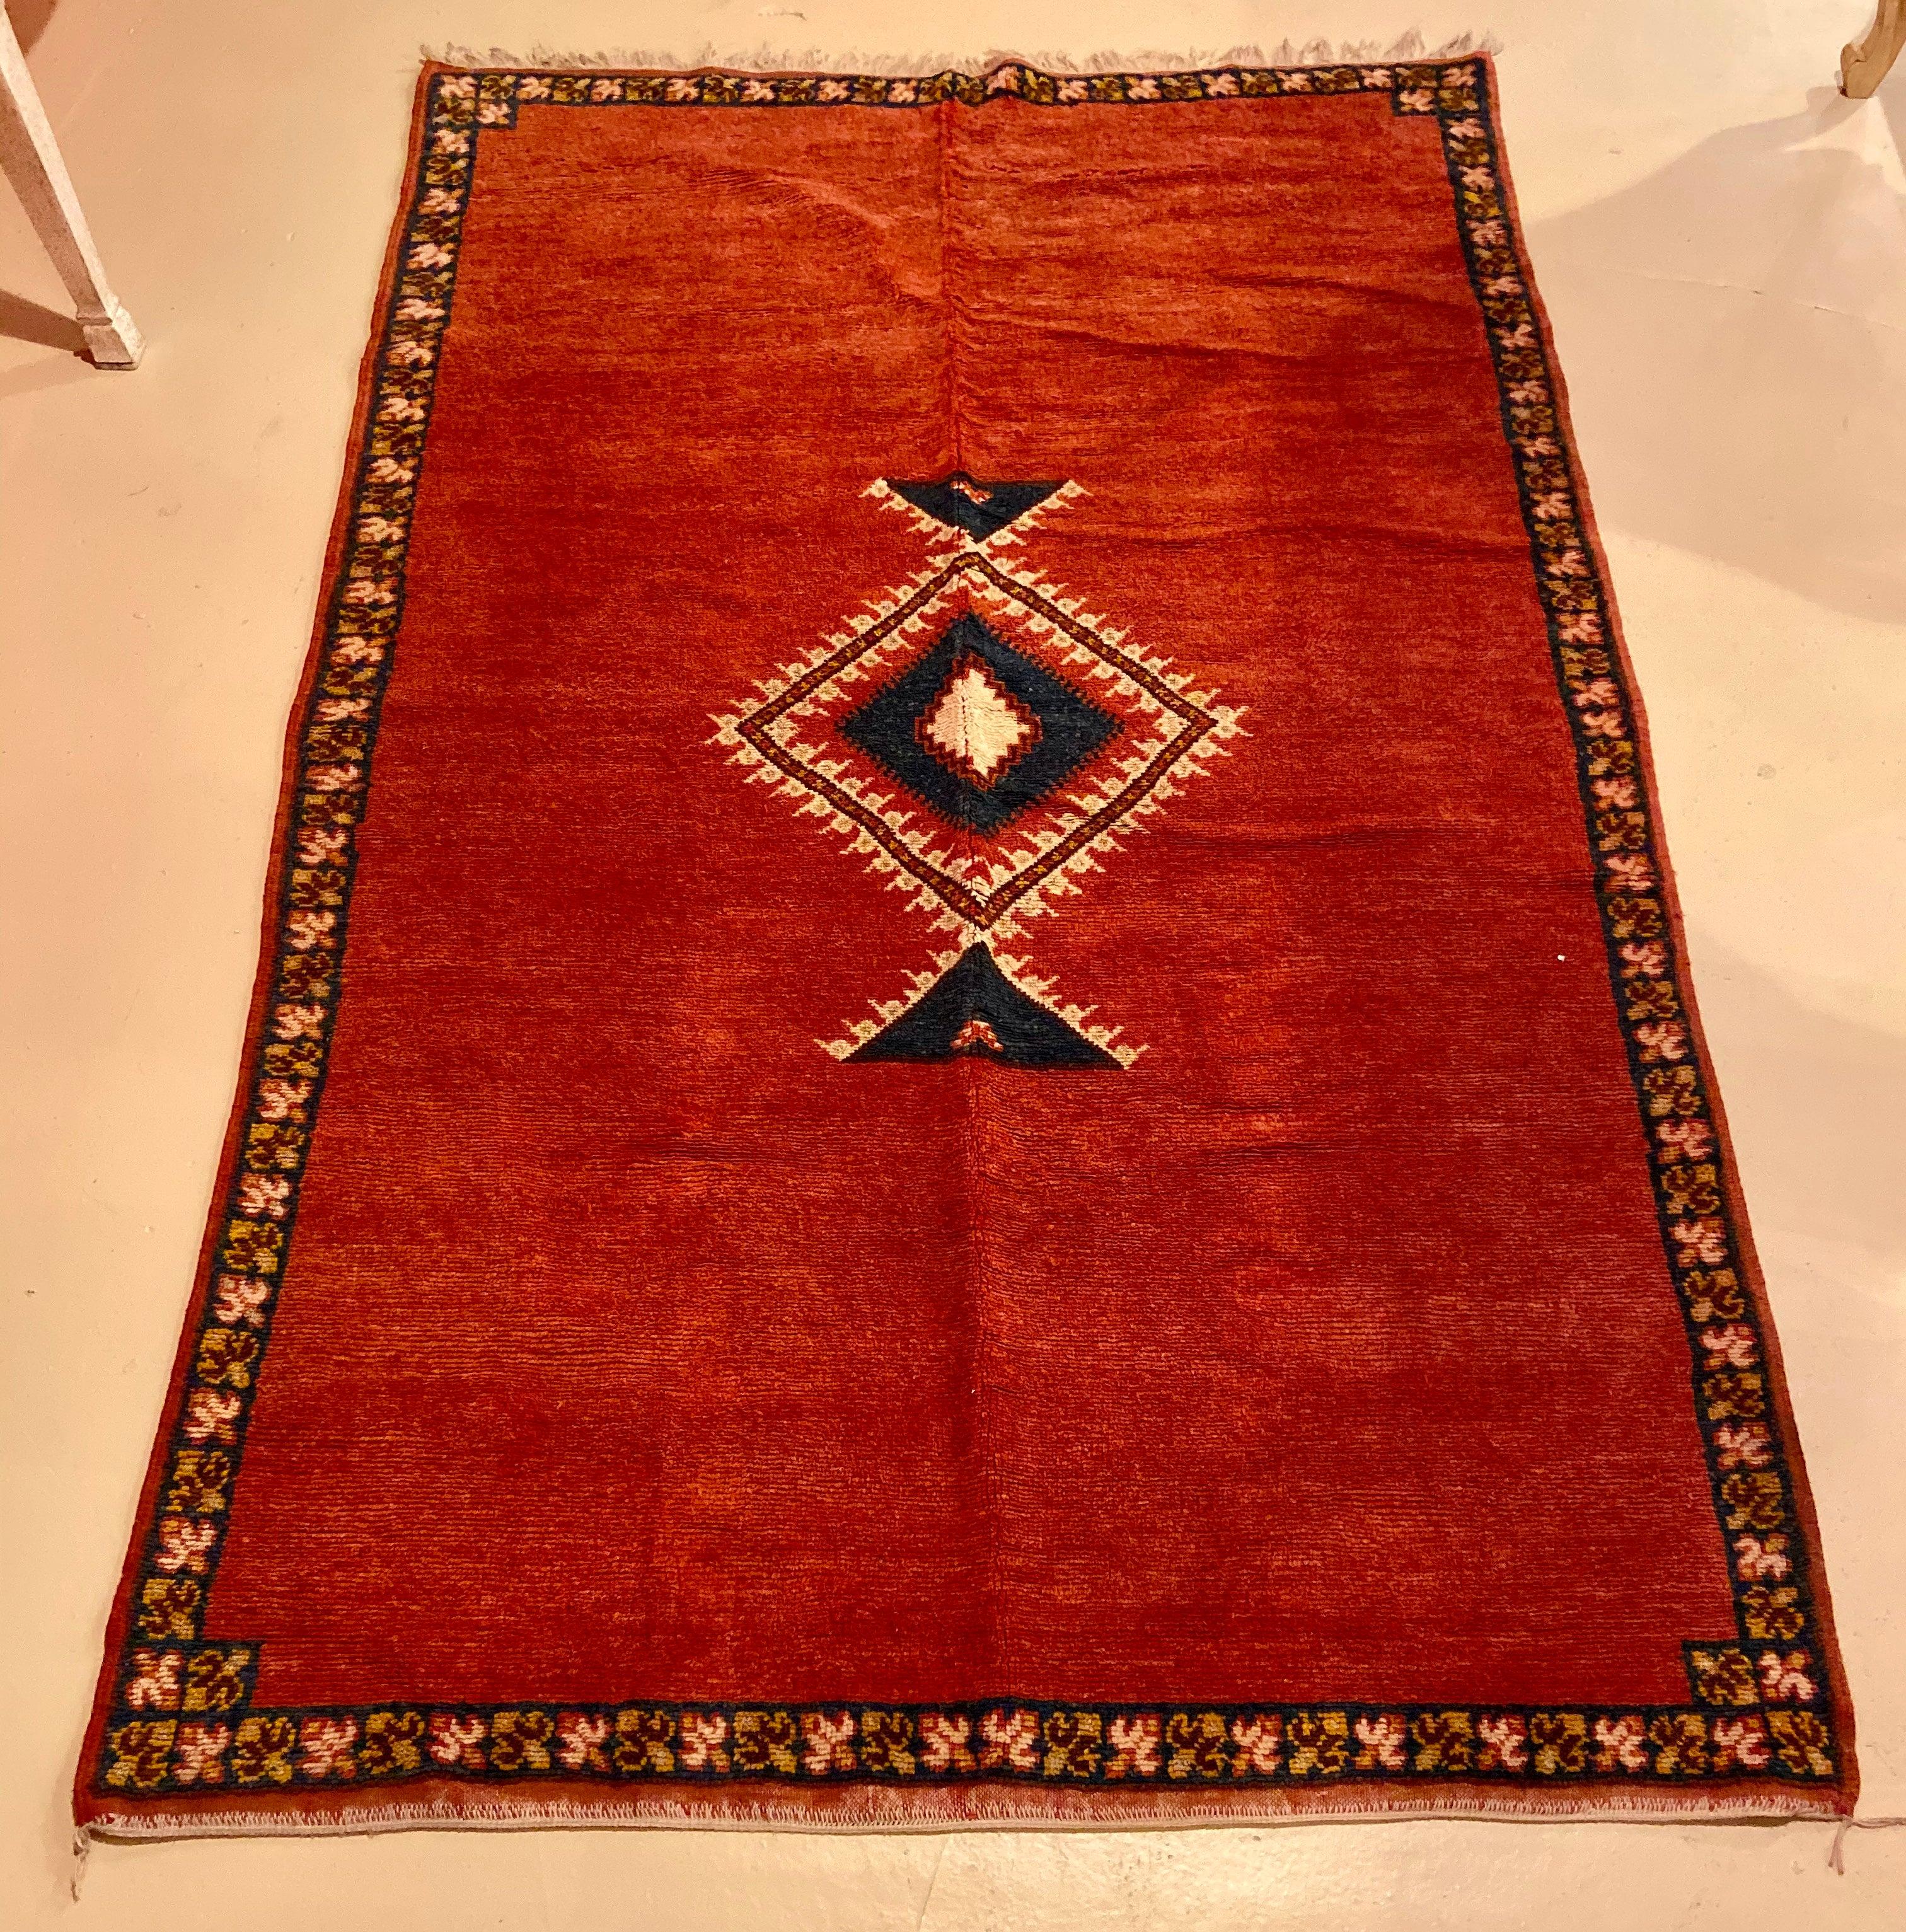 Moroccan tribal handwoven rug or carpet wool with blue diamond on red background. A stunning and sophisticated addition to your living room, dining room, foyer or bedroom

-Handwoven carpet from the Taznacht region of Morocco 
-Made using the